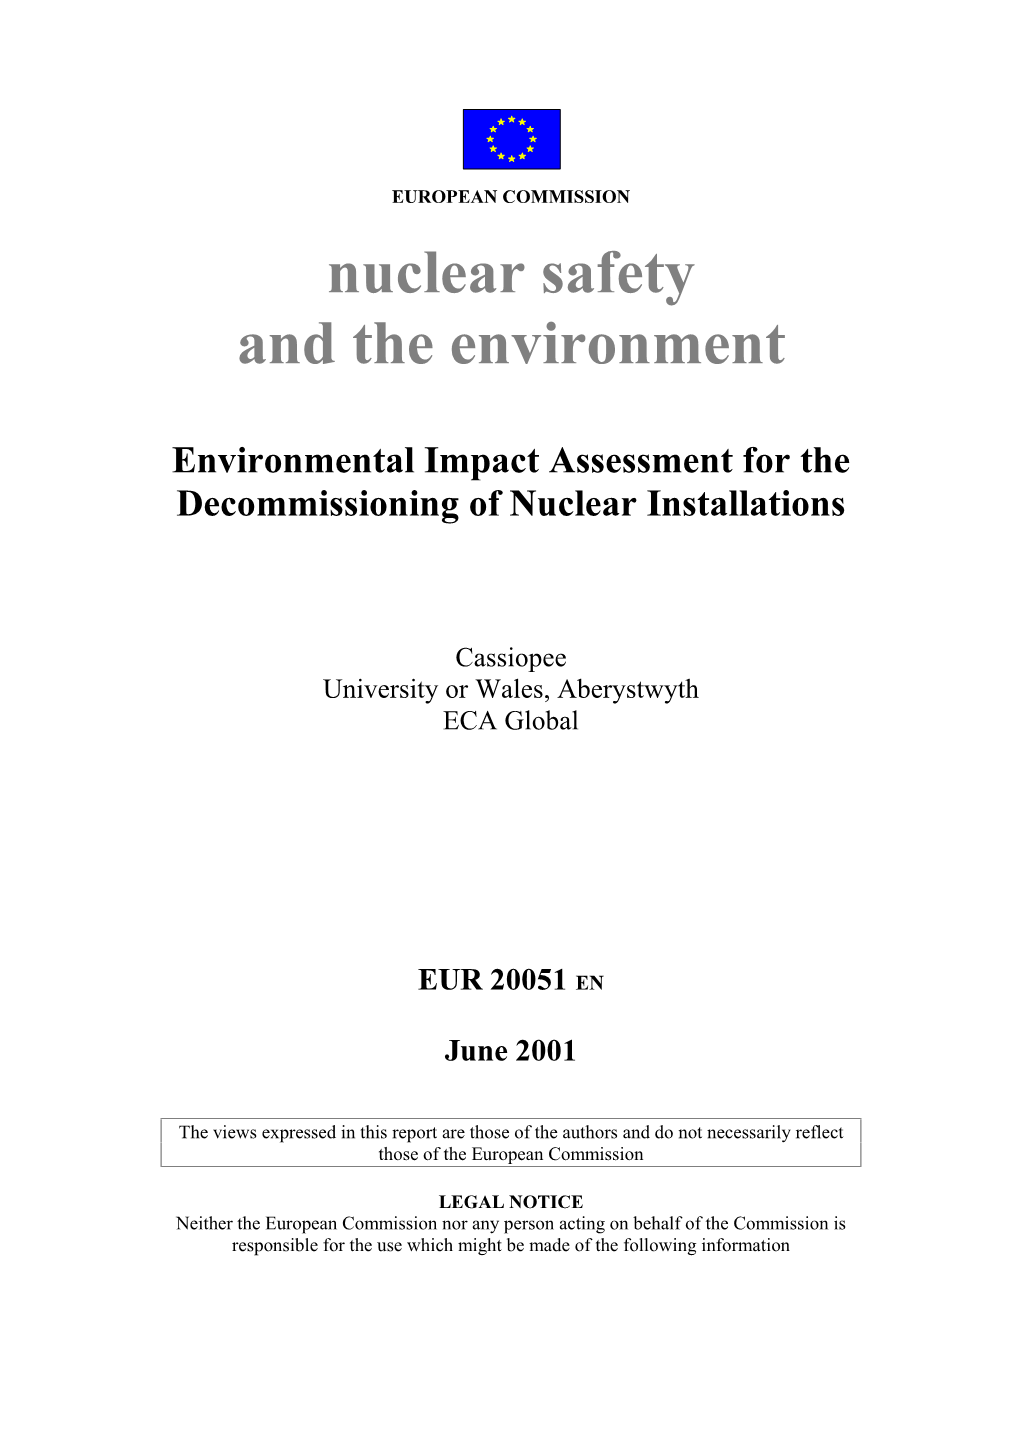 Environmental Impact Assessment for the Decommissioning of Nuclear Installations